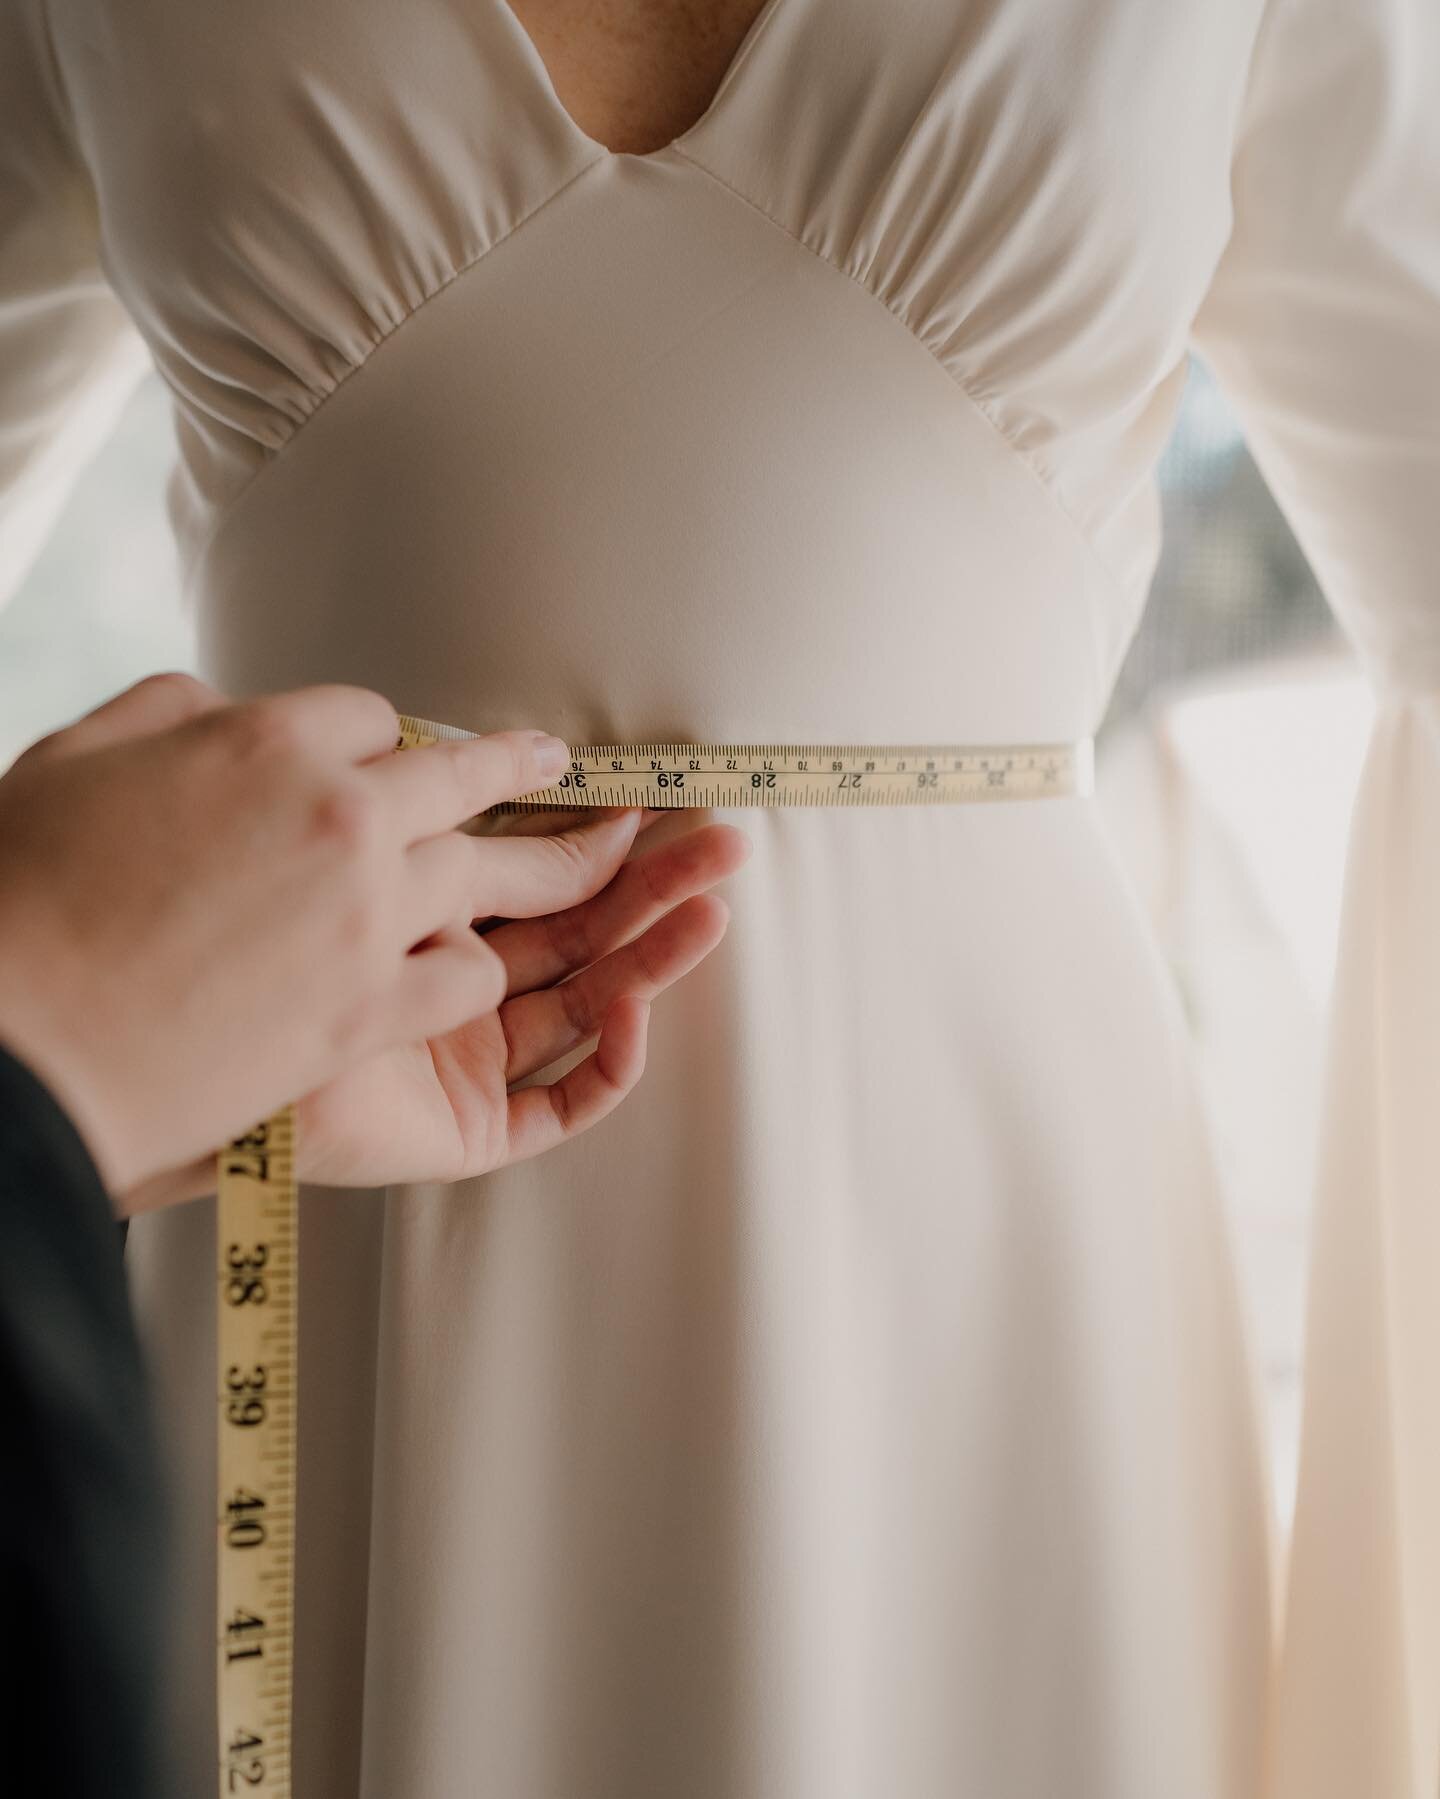 Getting the fit just right.

When working on a custom piece, I will meet with the client 3-4 times throughout the process. Initially taking measurements and designing the dream dress early on. Once we get to the point of having your finished piece to